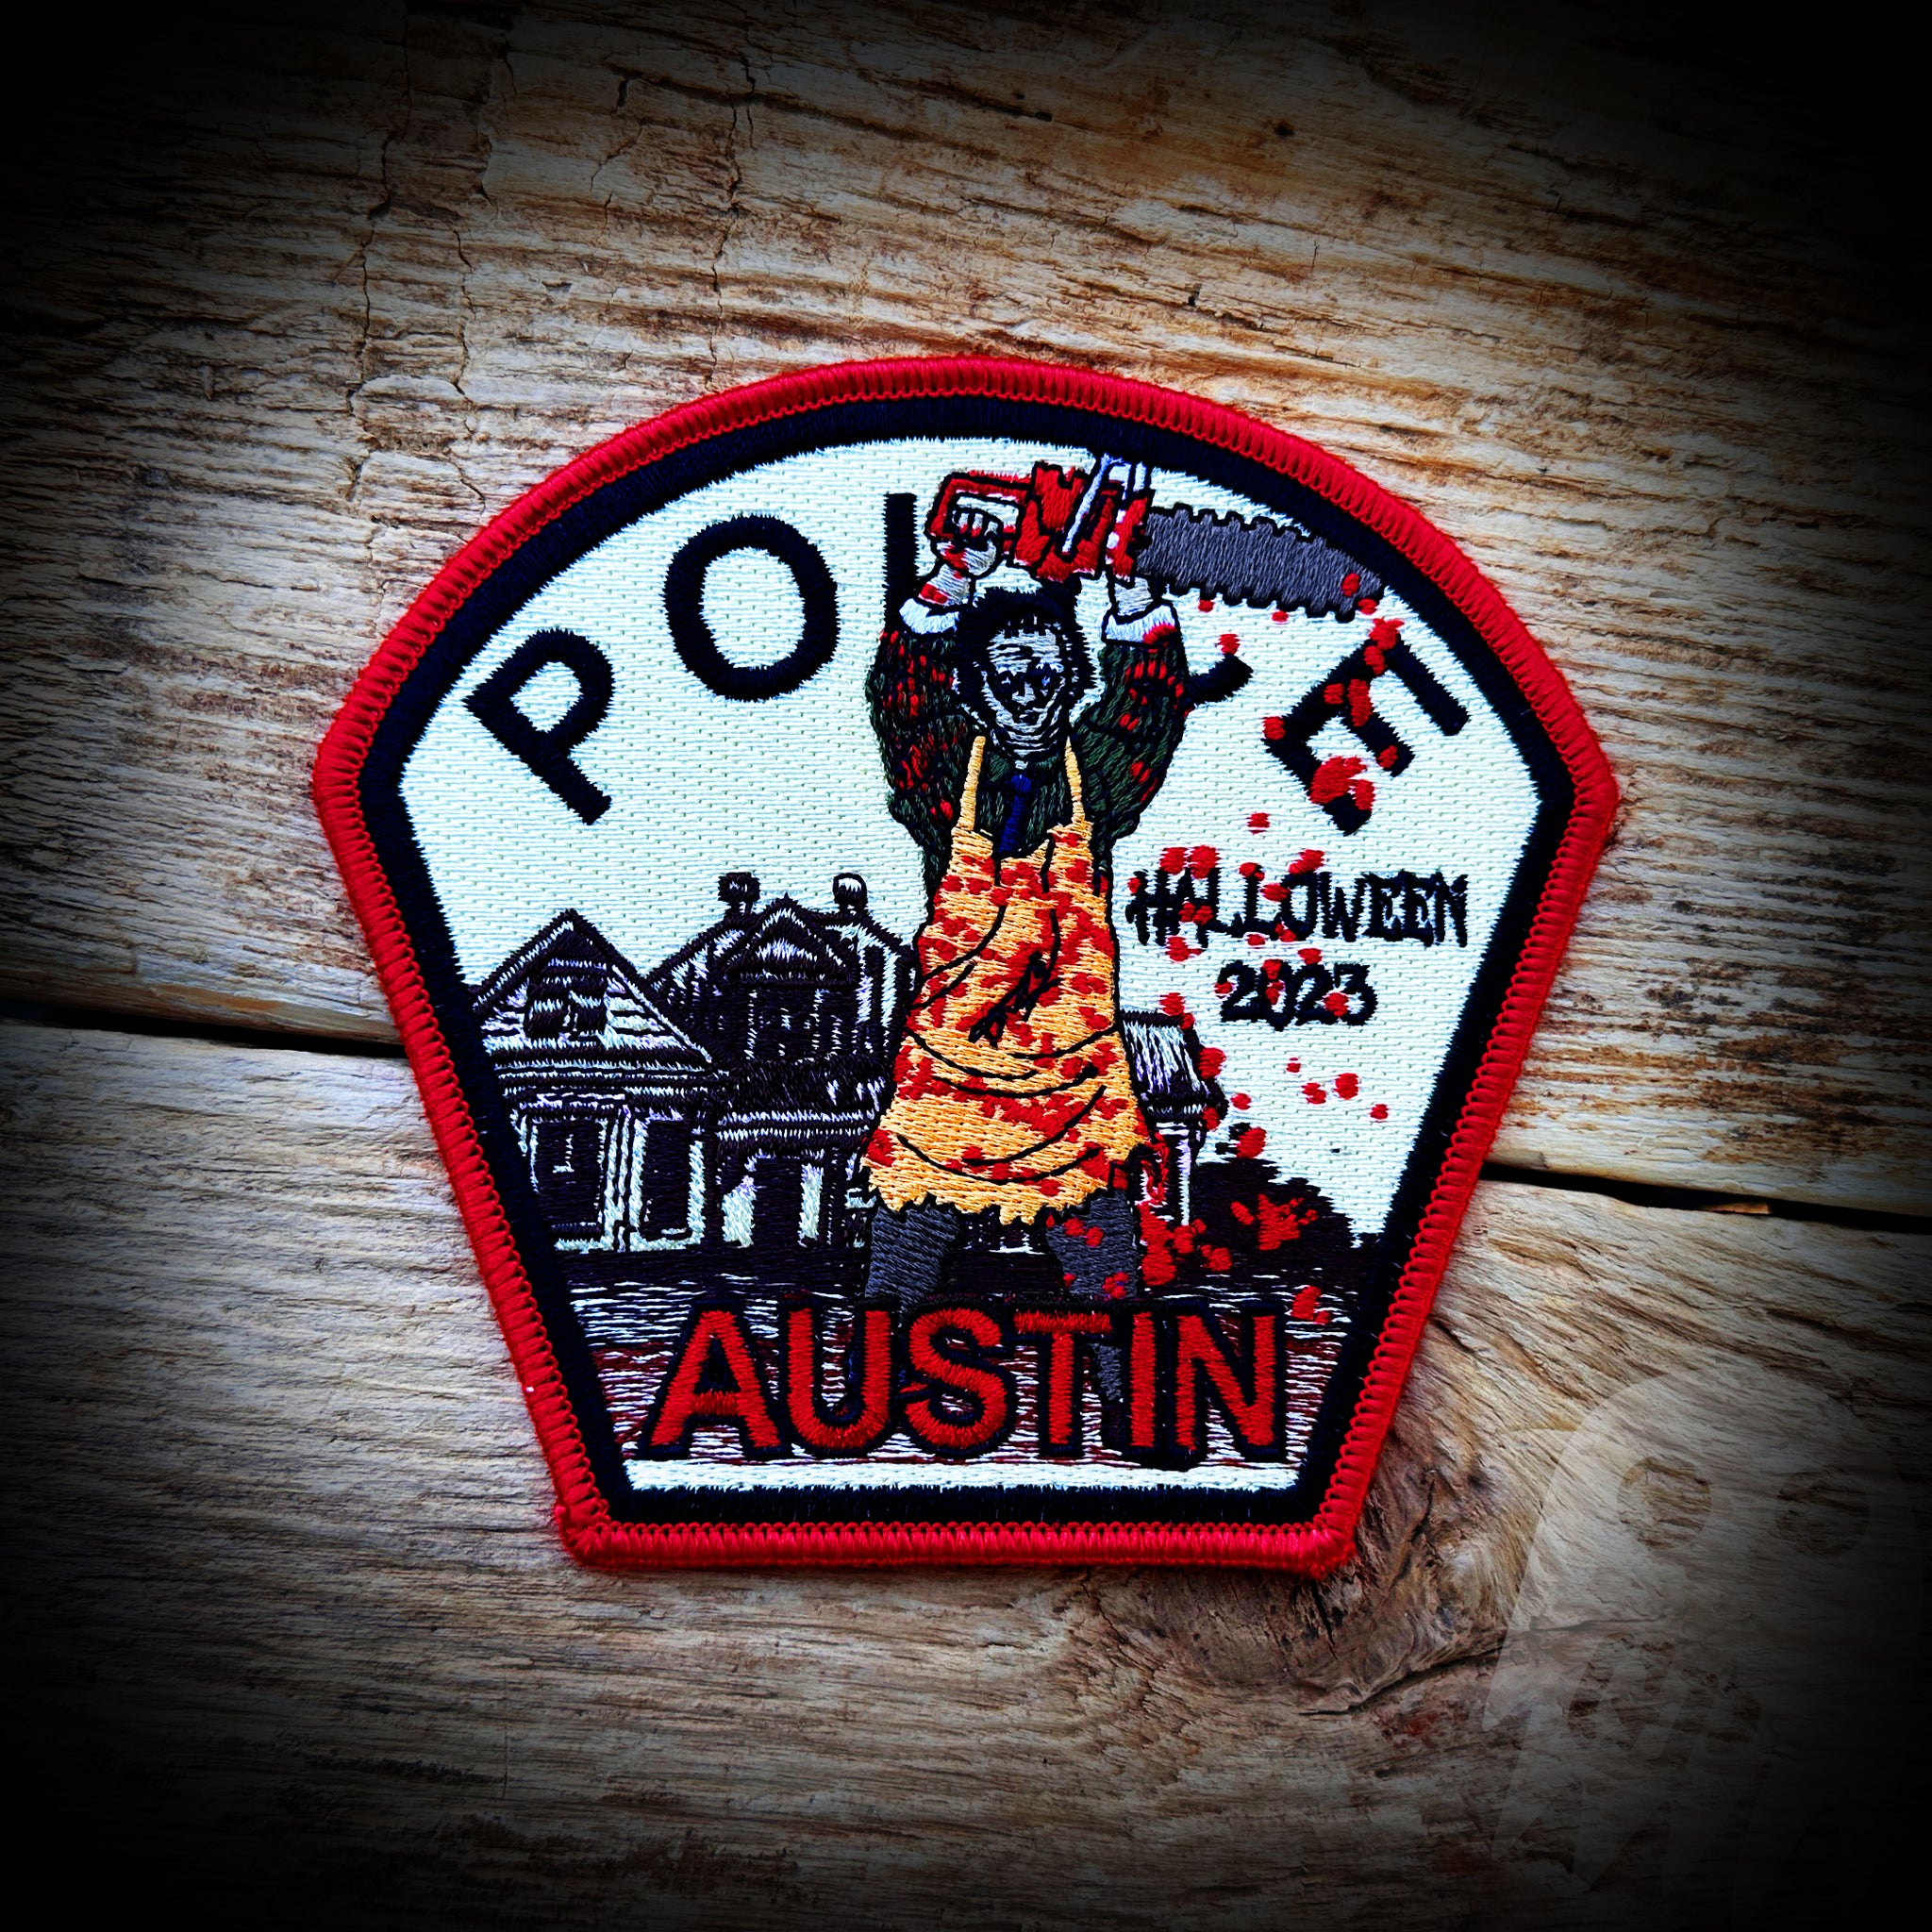 Austin, TX Police Department 2023 Halloween Patch - Authentic / LIMITED